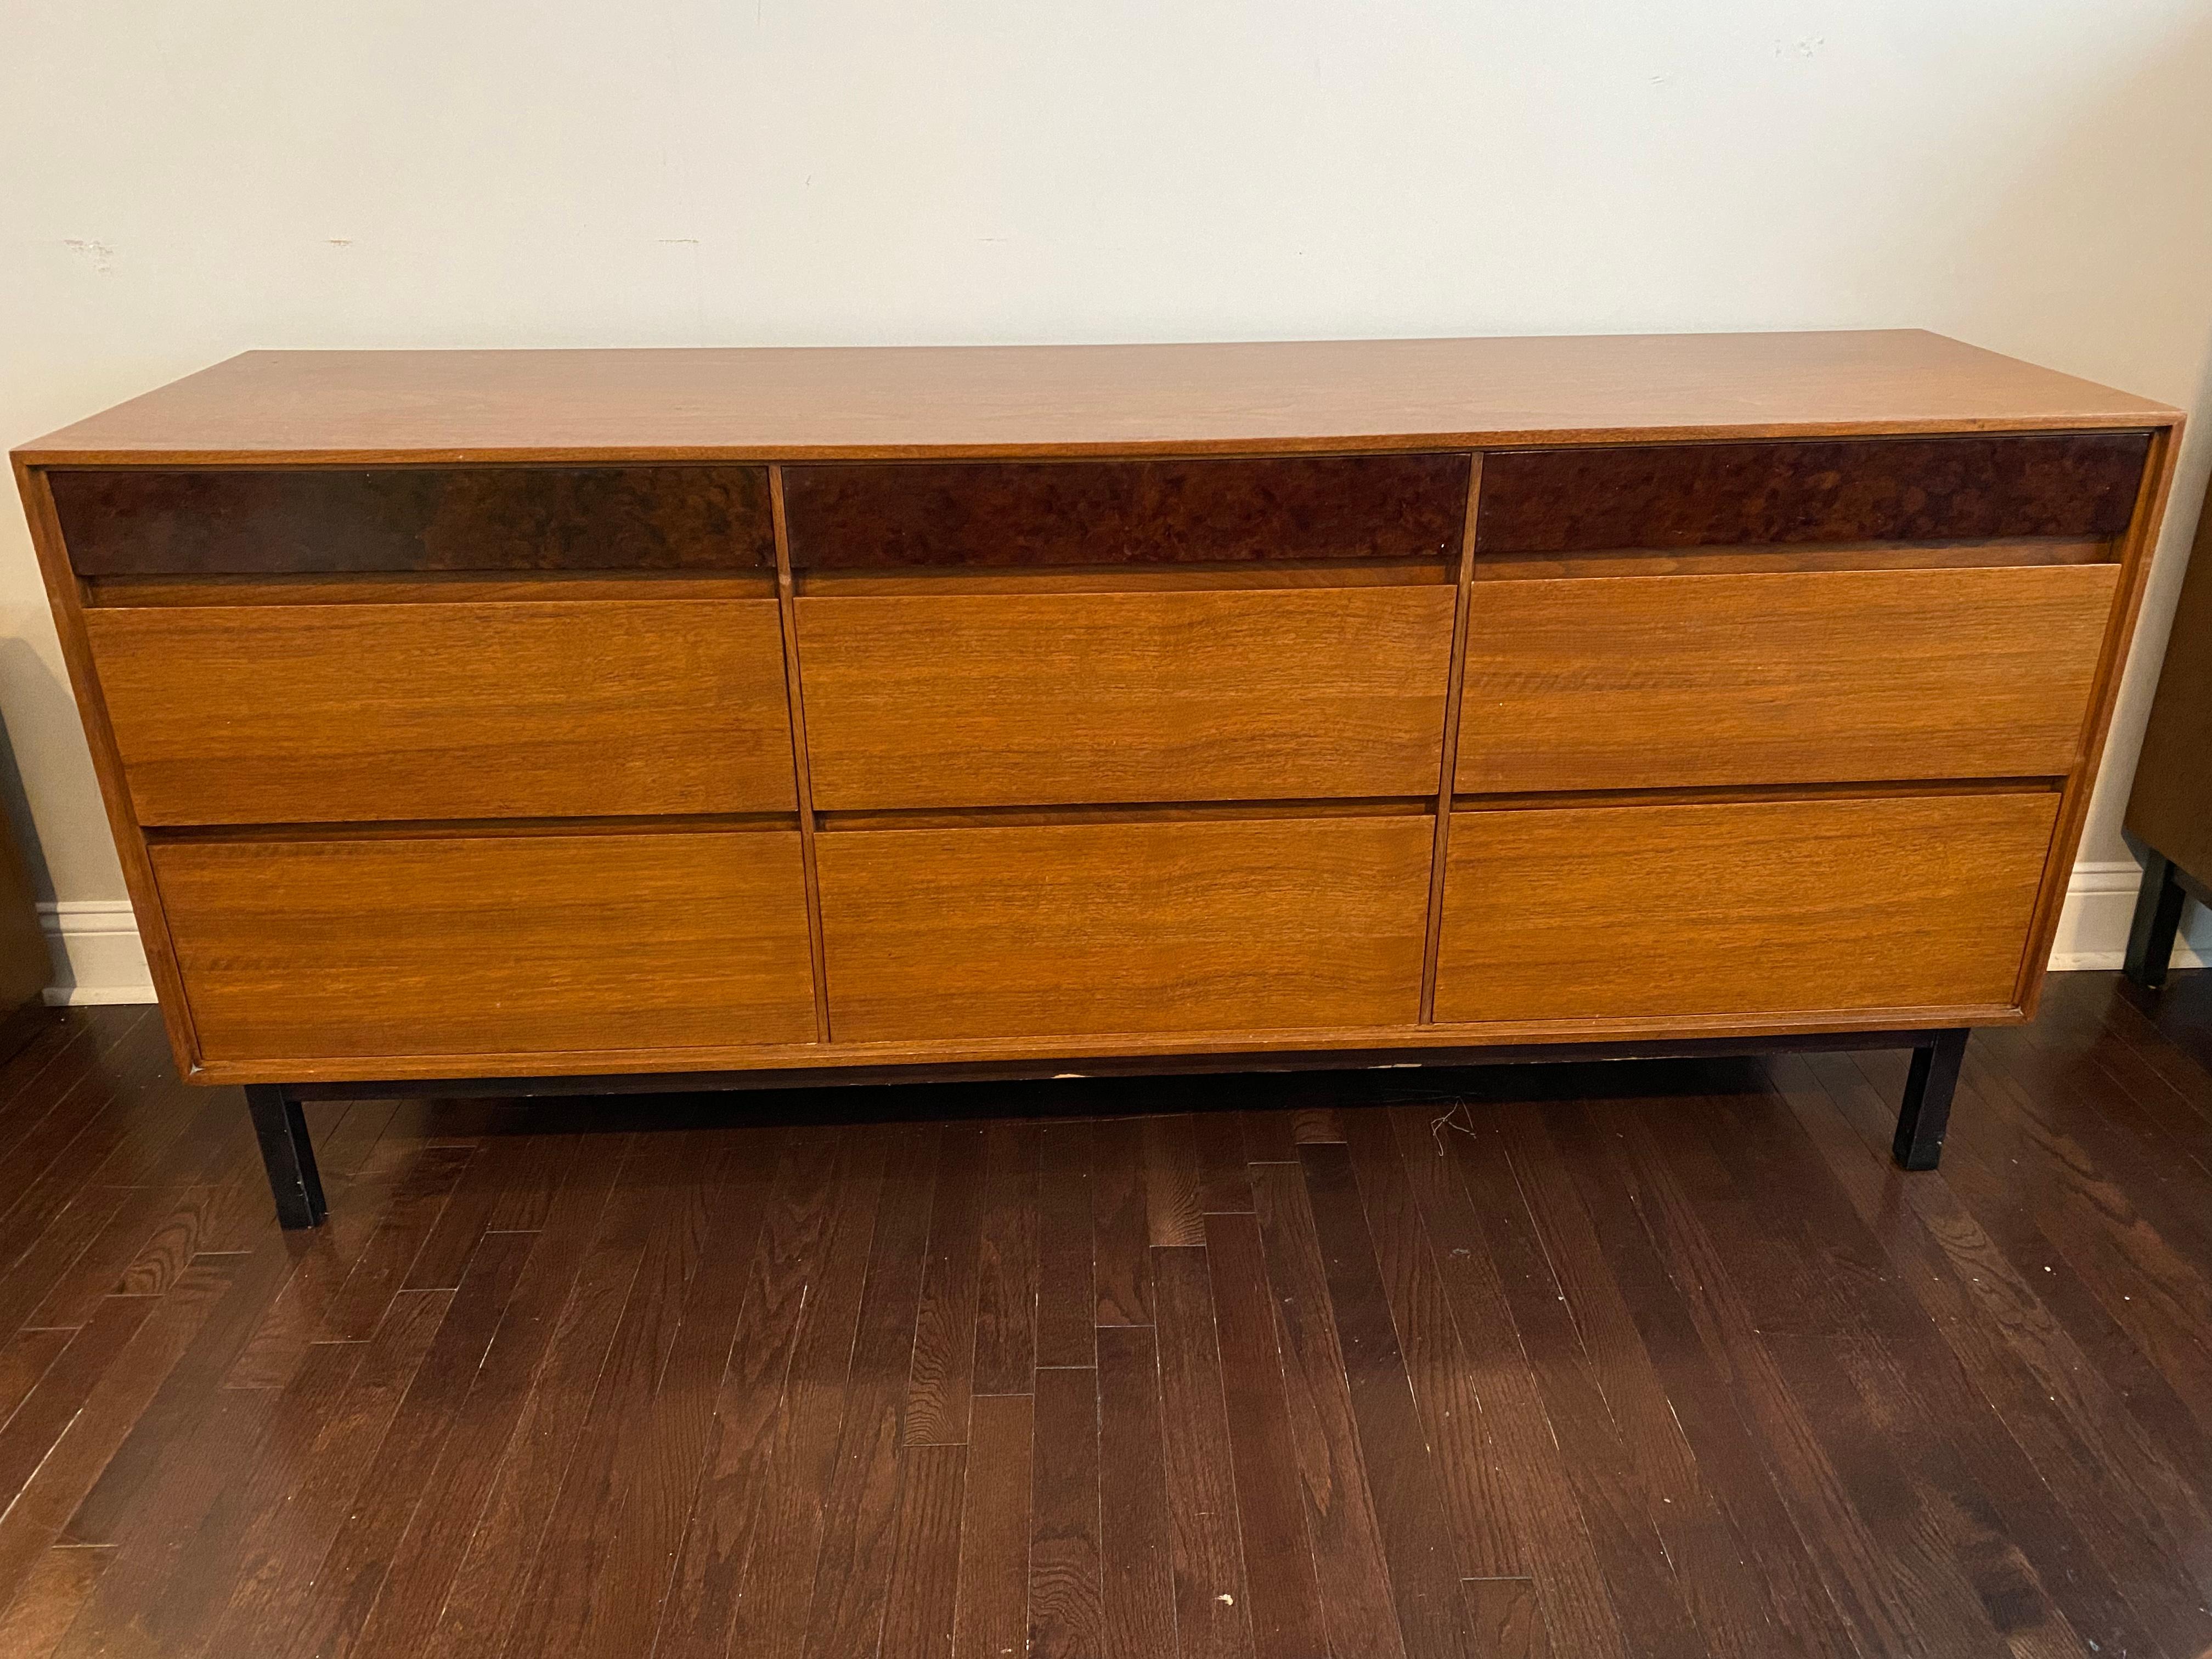 Walnut and Burl Mid-Century sideboard by John Stuart for Mt. Airy Furniture Co. Beautiful walnut sideboard with decorative-painted burl on top drawers. Three small drawers at top with six large drawers at bottom with black base and legs. Beautiful